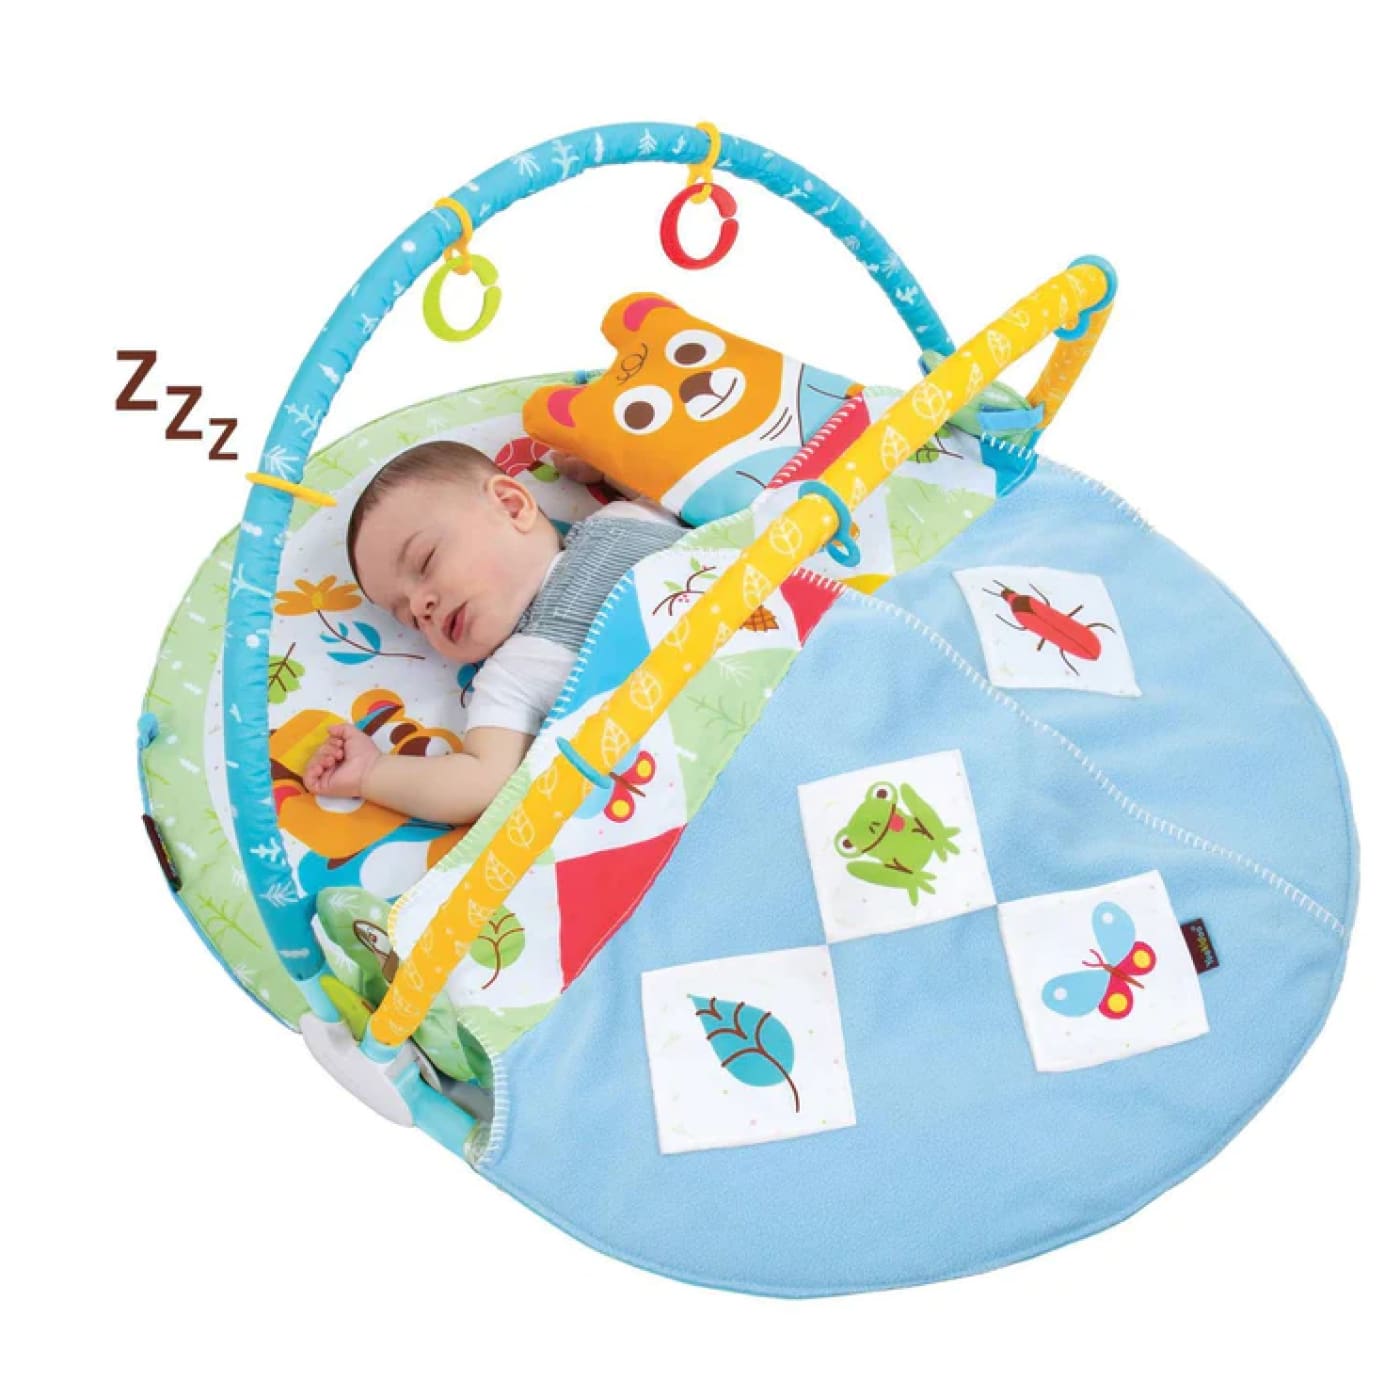 Yookidoo Play N Nap Gymotion - TOYS & PLAY - PLAY MATS/GYMS